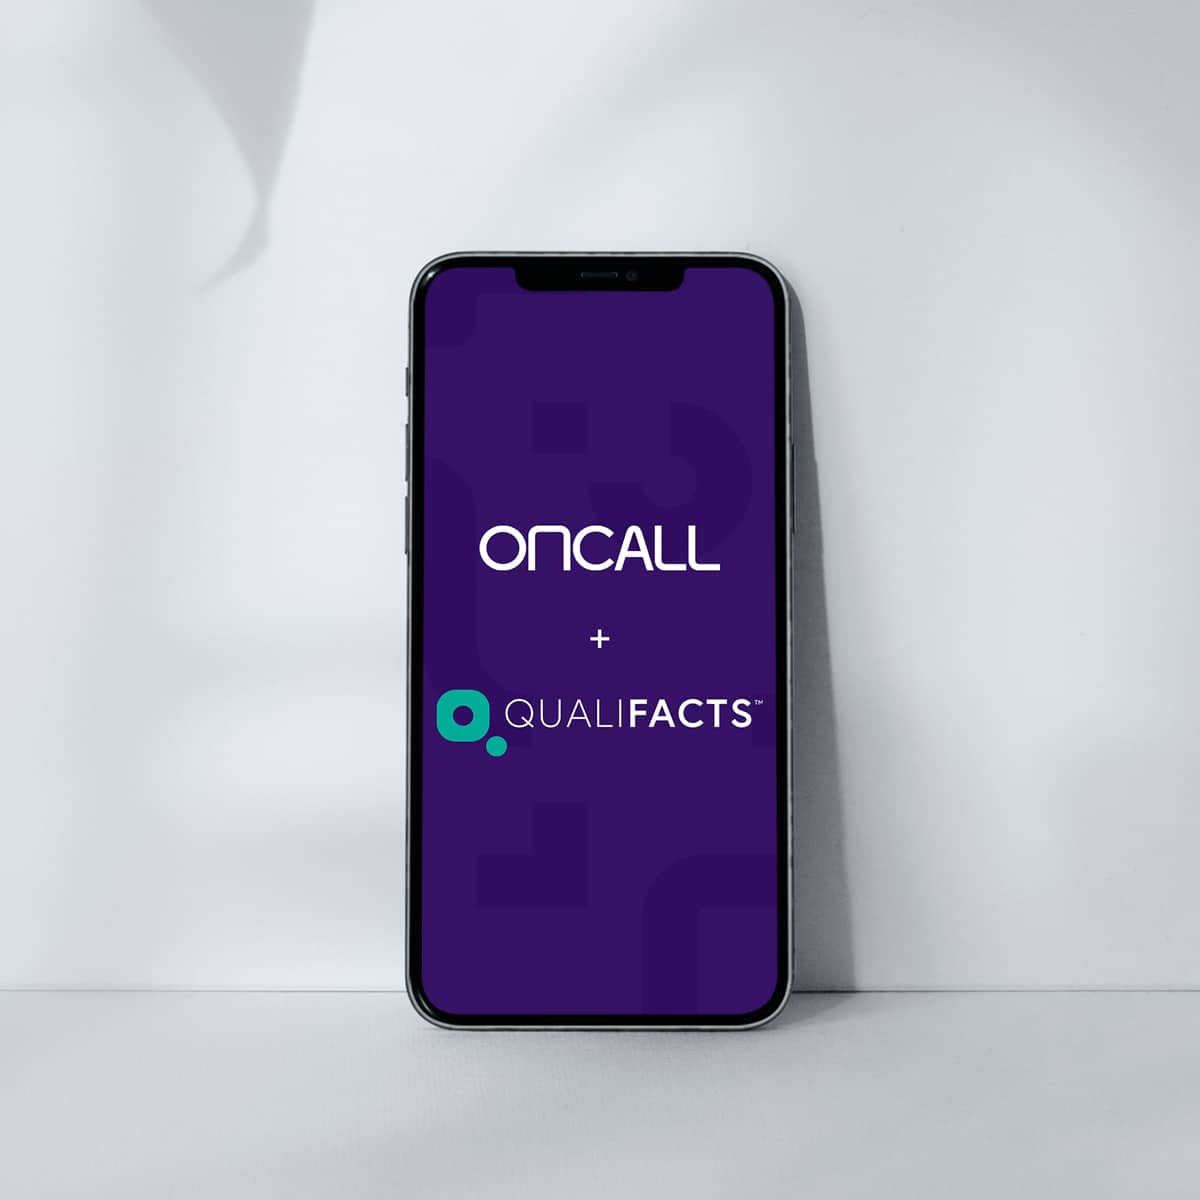 OnCall Qualifacts Acquisition